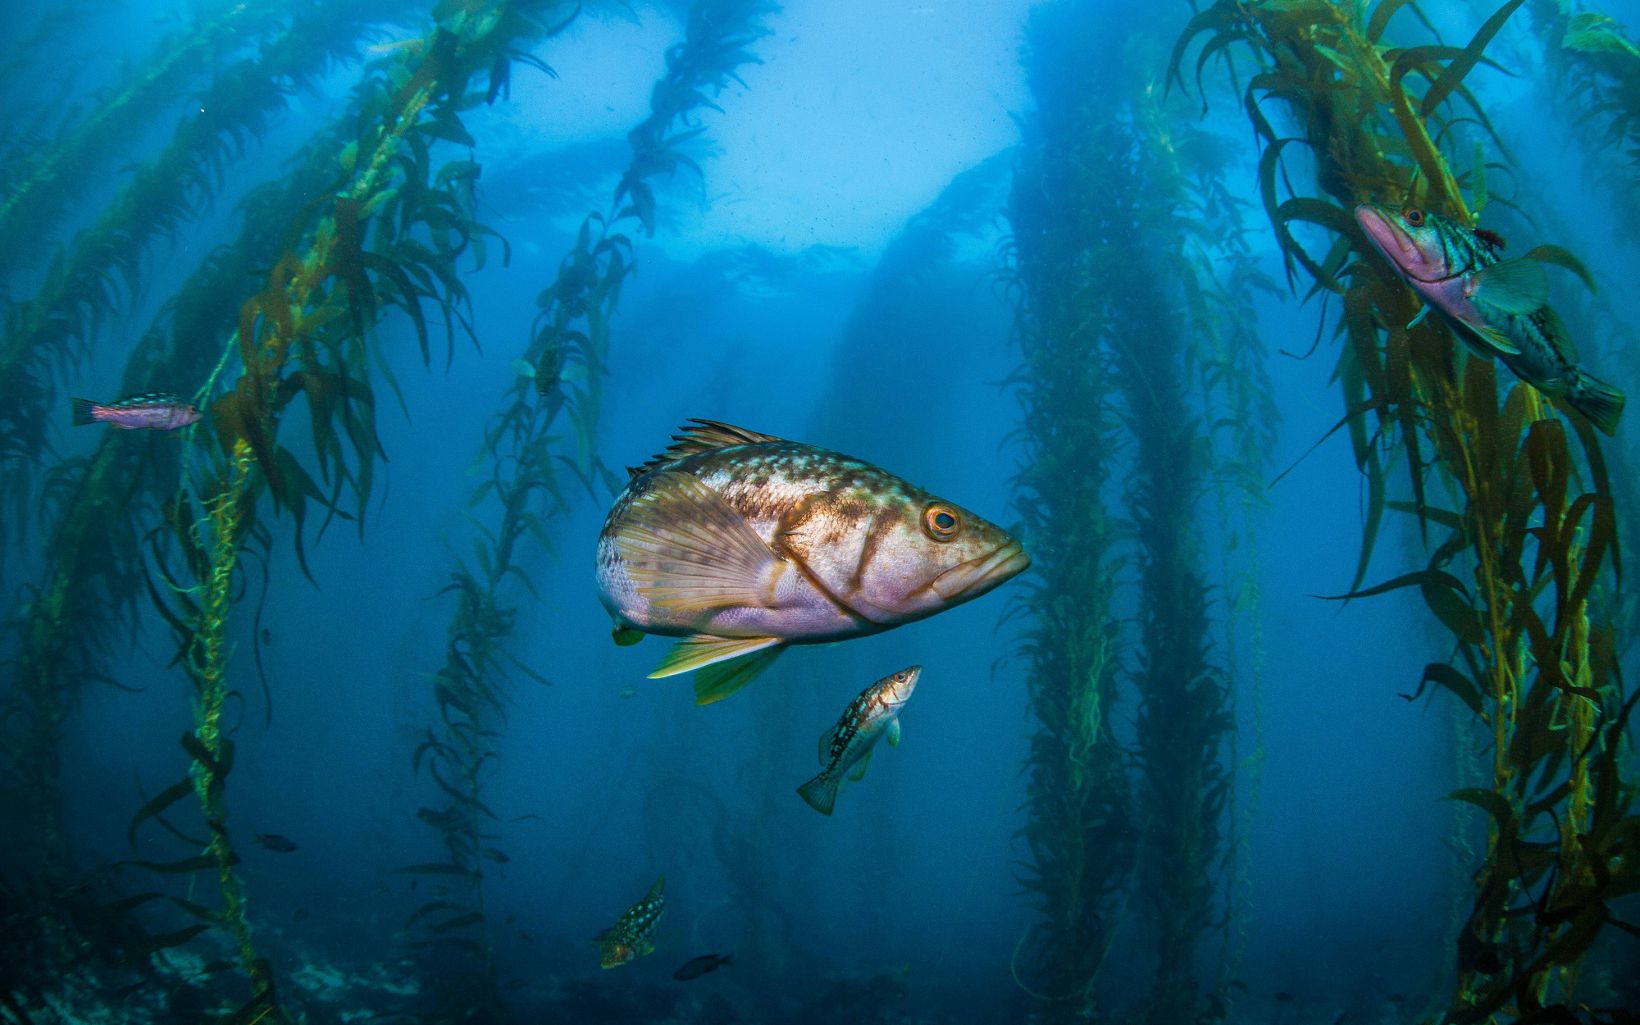 Kelp Forest Fish in a kelp forest off the coast of California © Ralph Pace